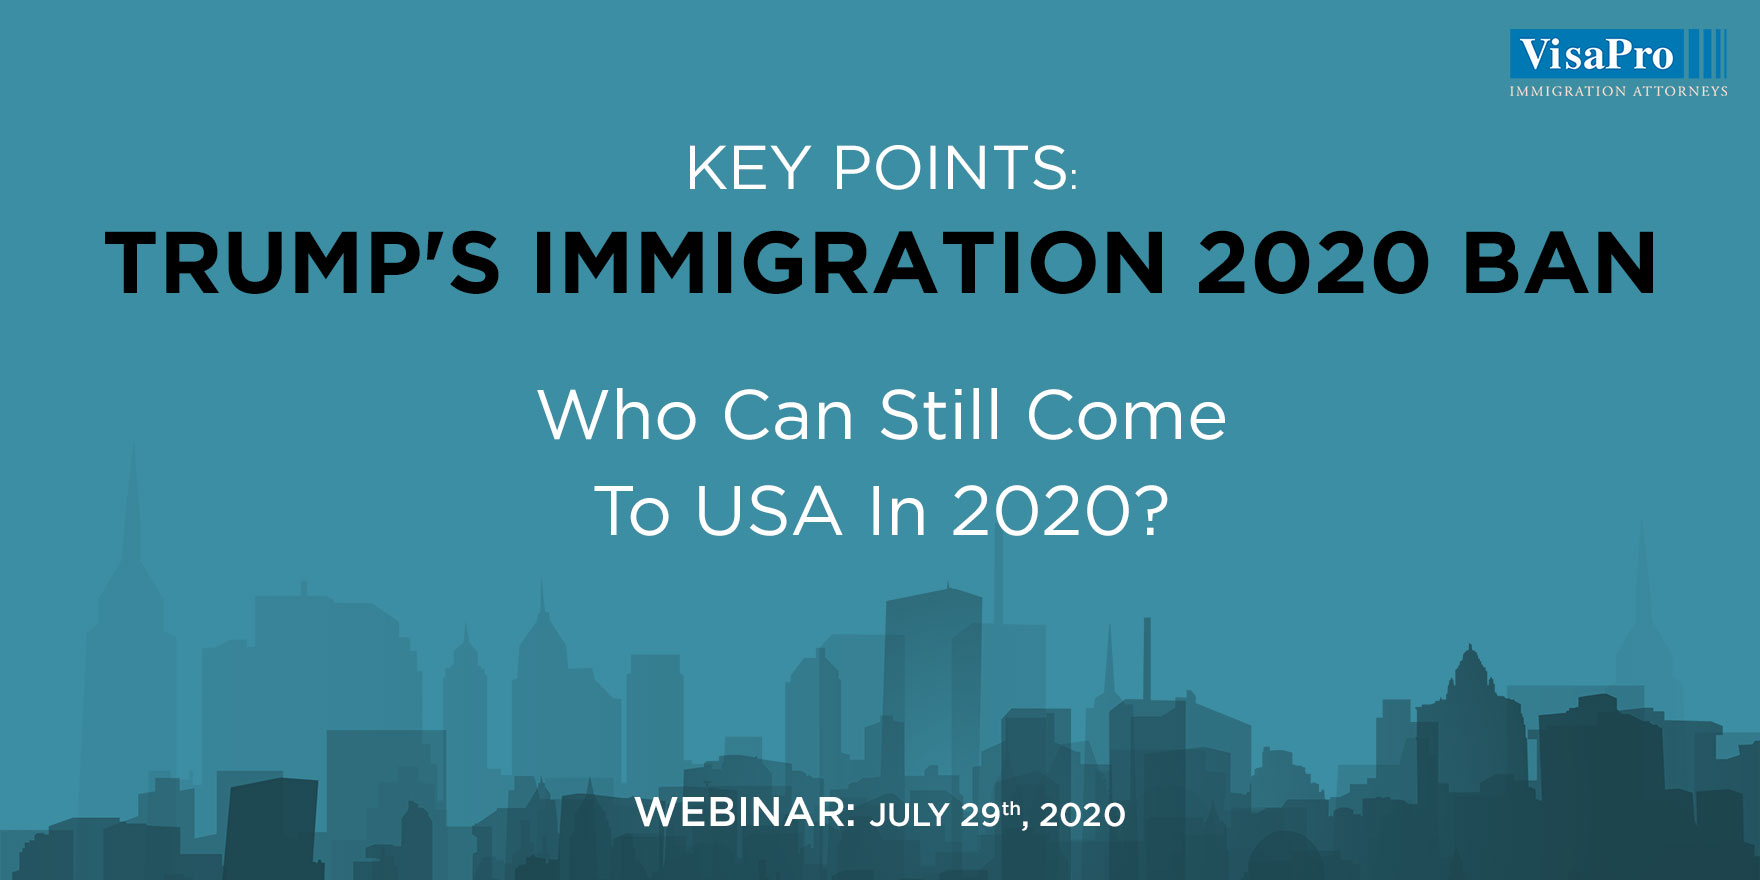 Trump's Immigration 2020 Ban: Who Can Still Come To USA In 2020?, Beijing, China